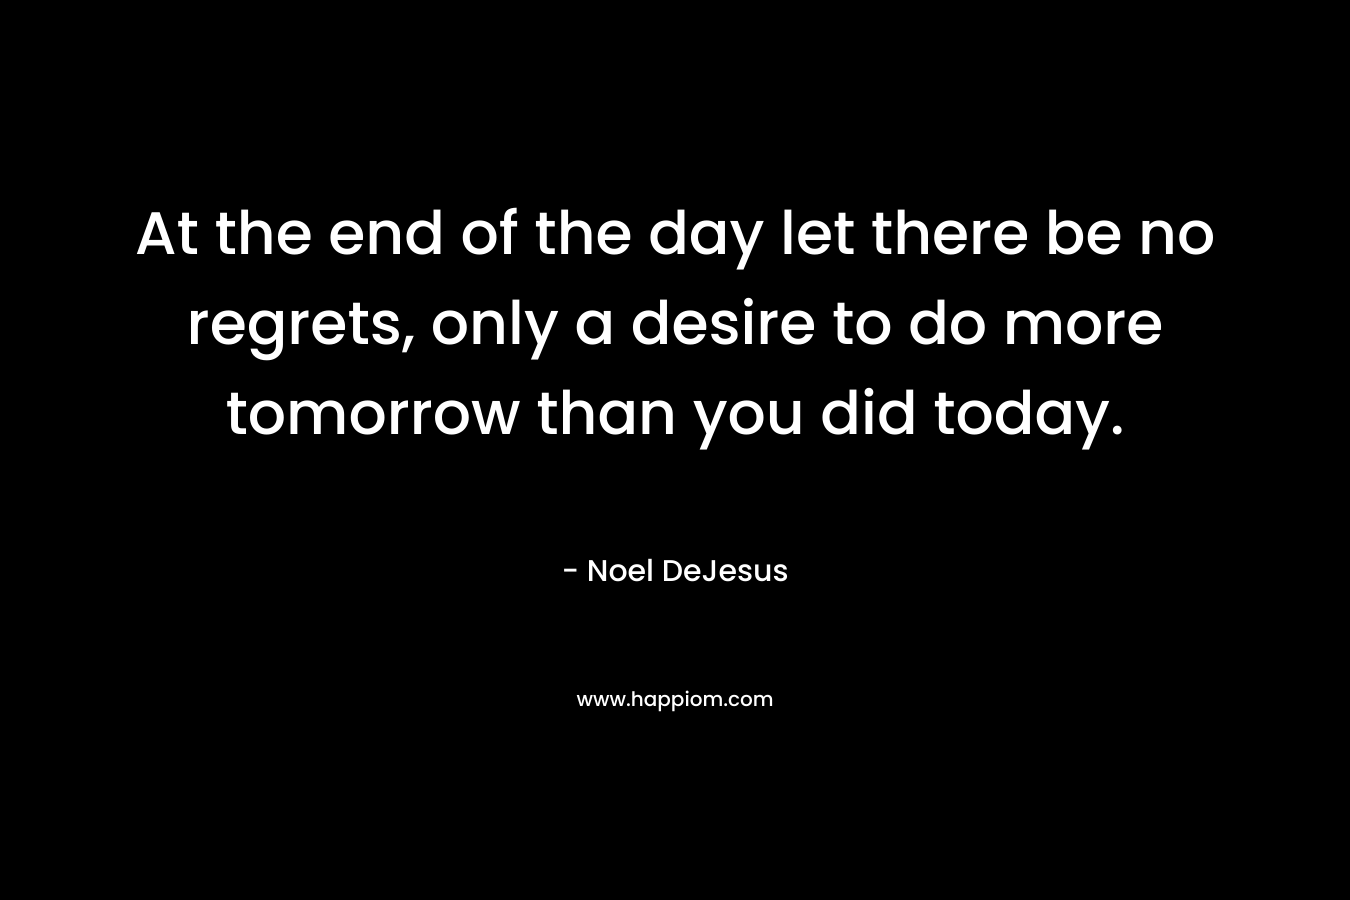 At the end of the day let there be no regrets, only a desire to do more tomorrow than you did today. – Noel DeJesus